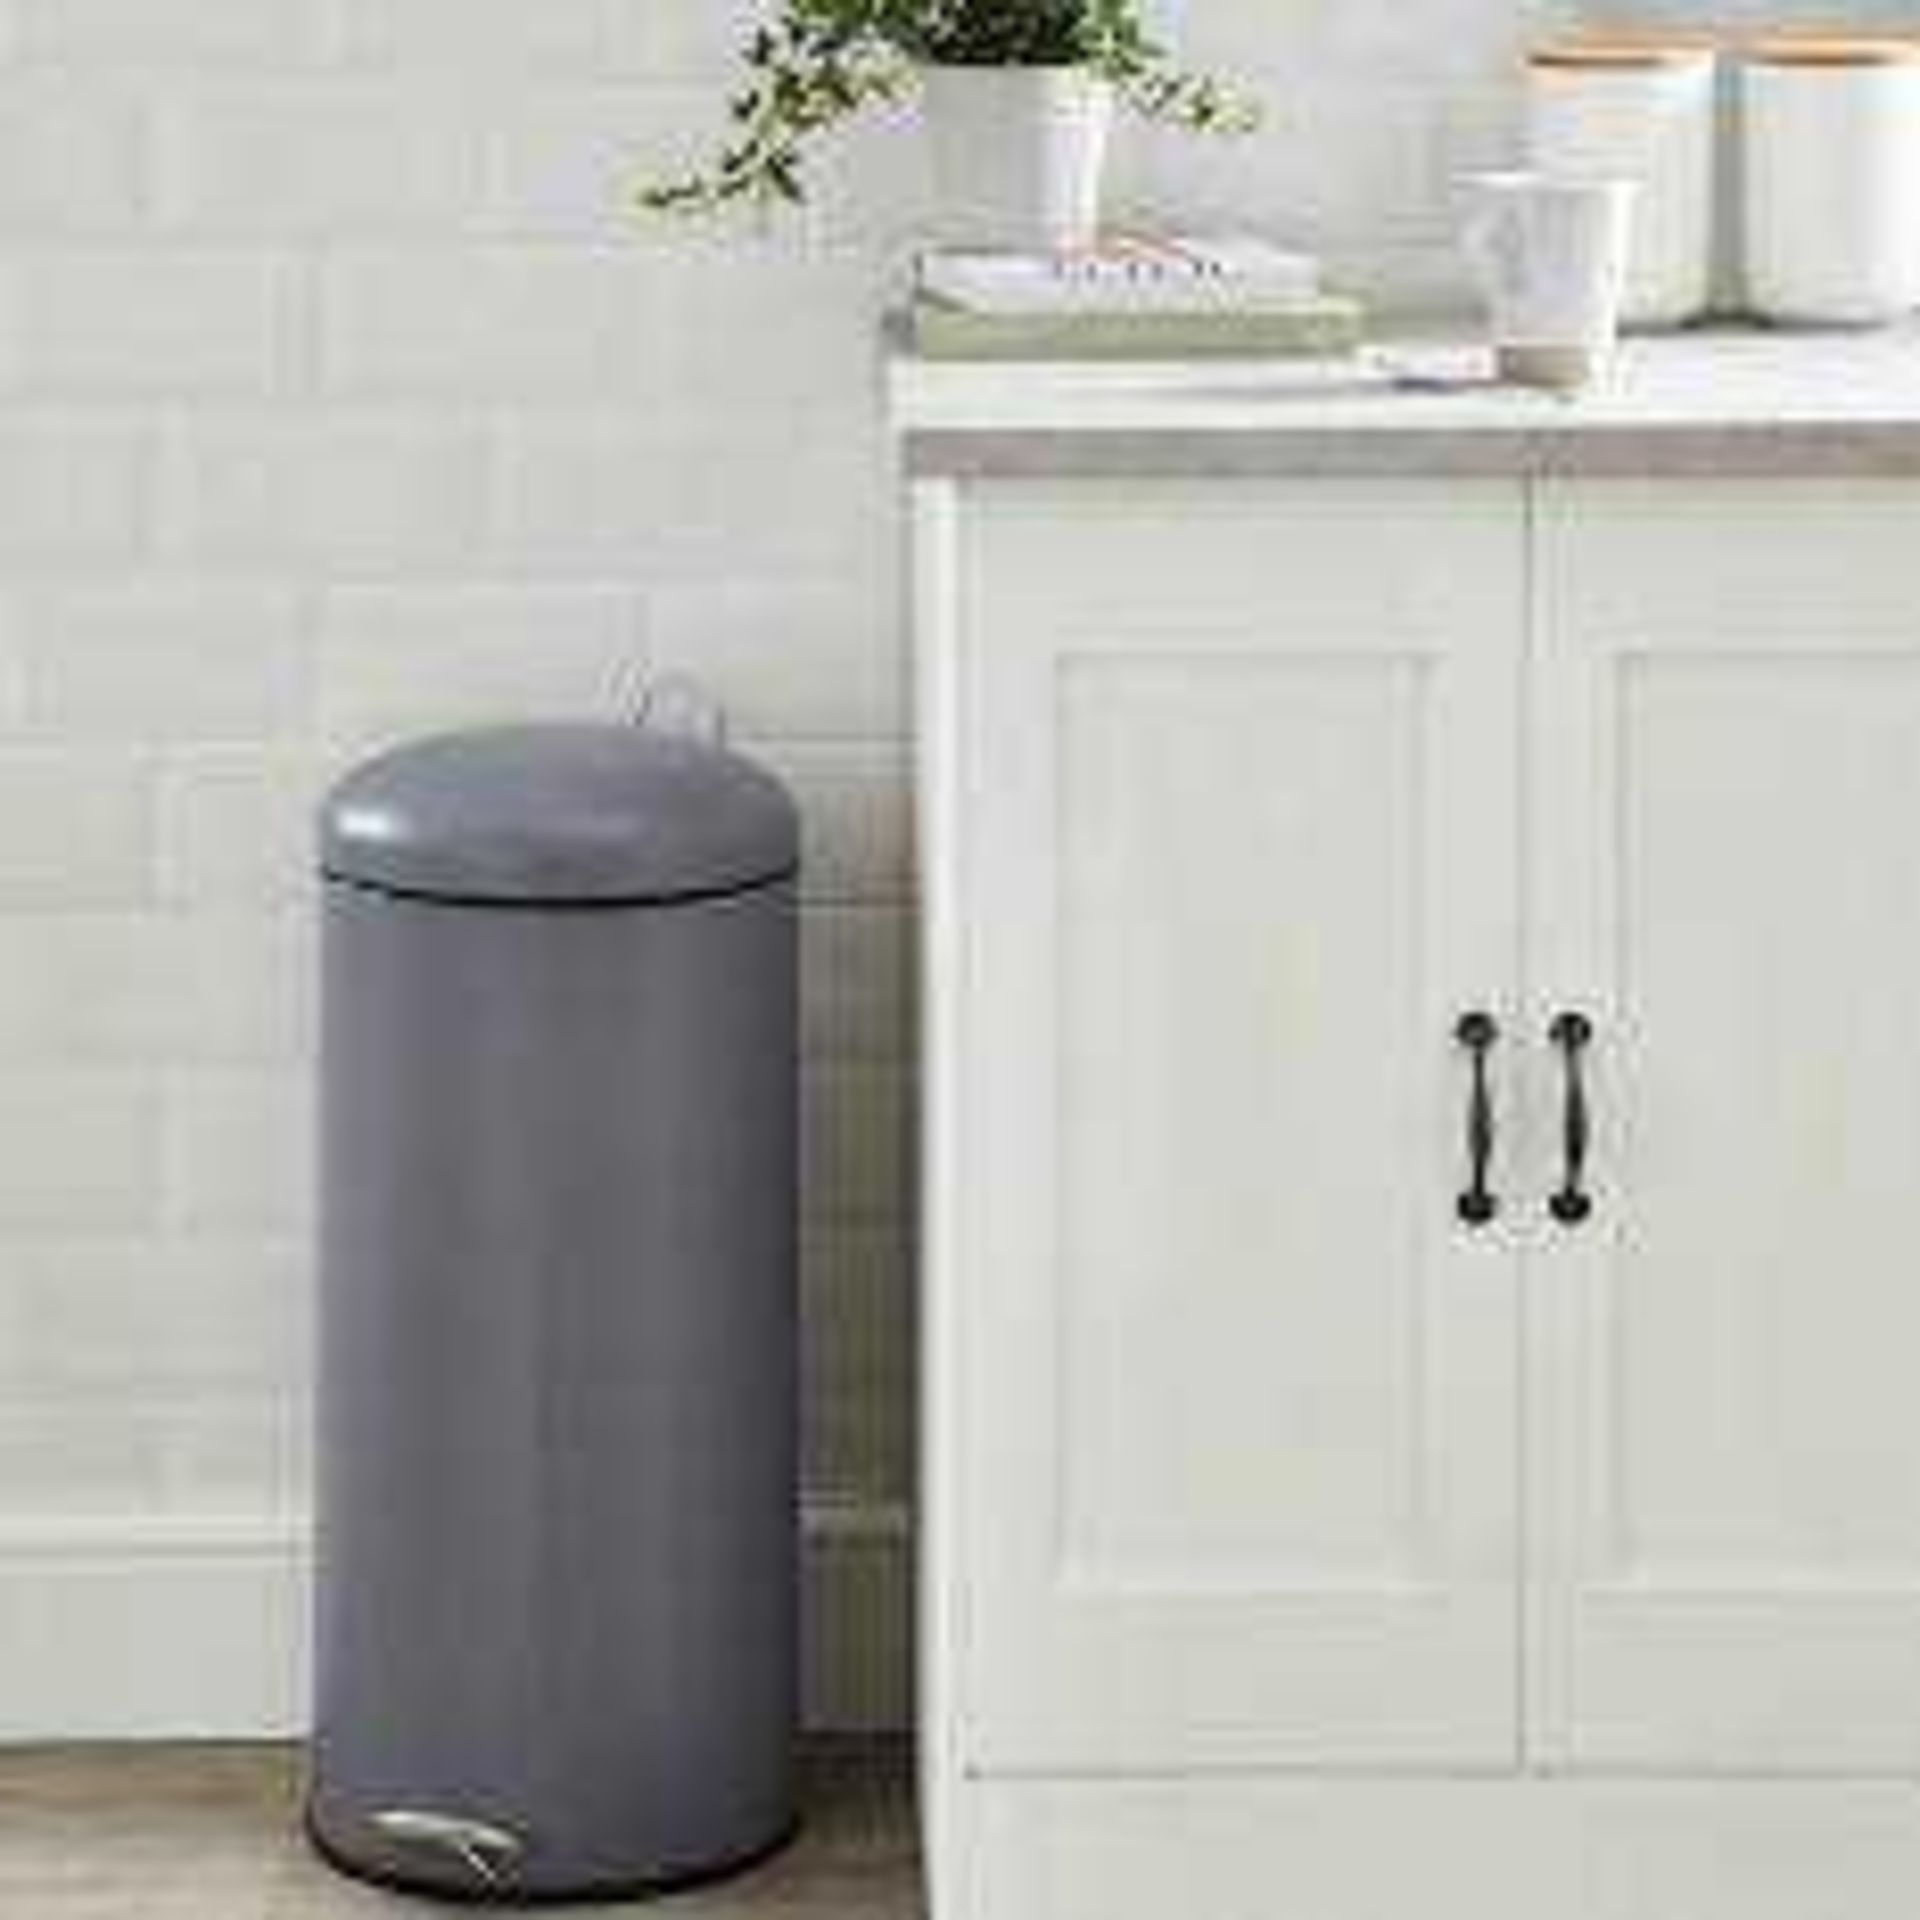 Combined RRP £100 Lot To Contain 2 Assorted John Lewis Pedal Bins